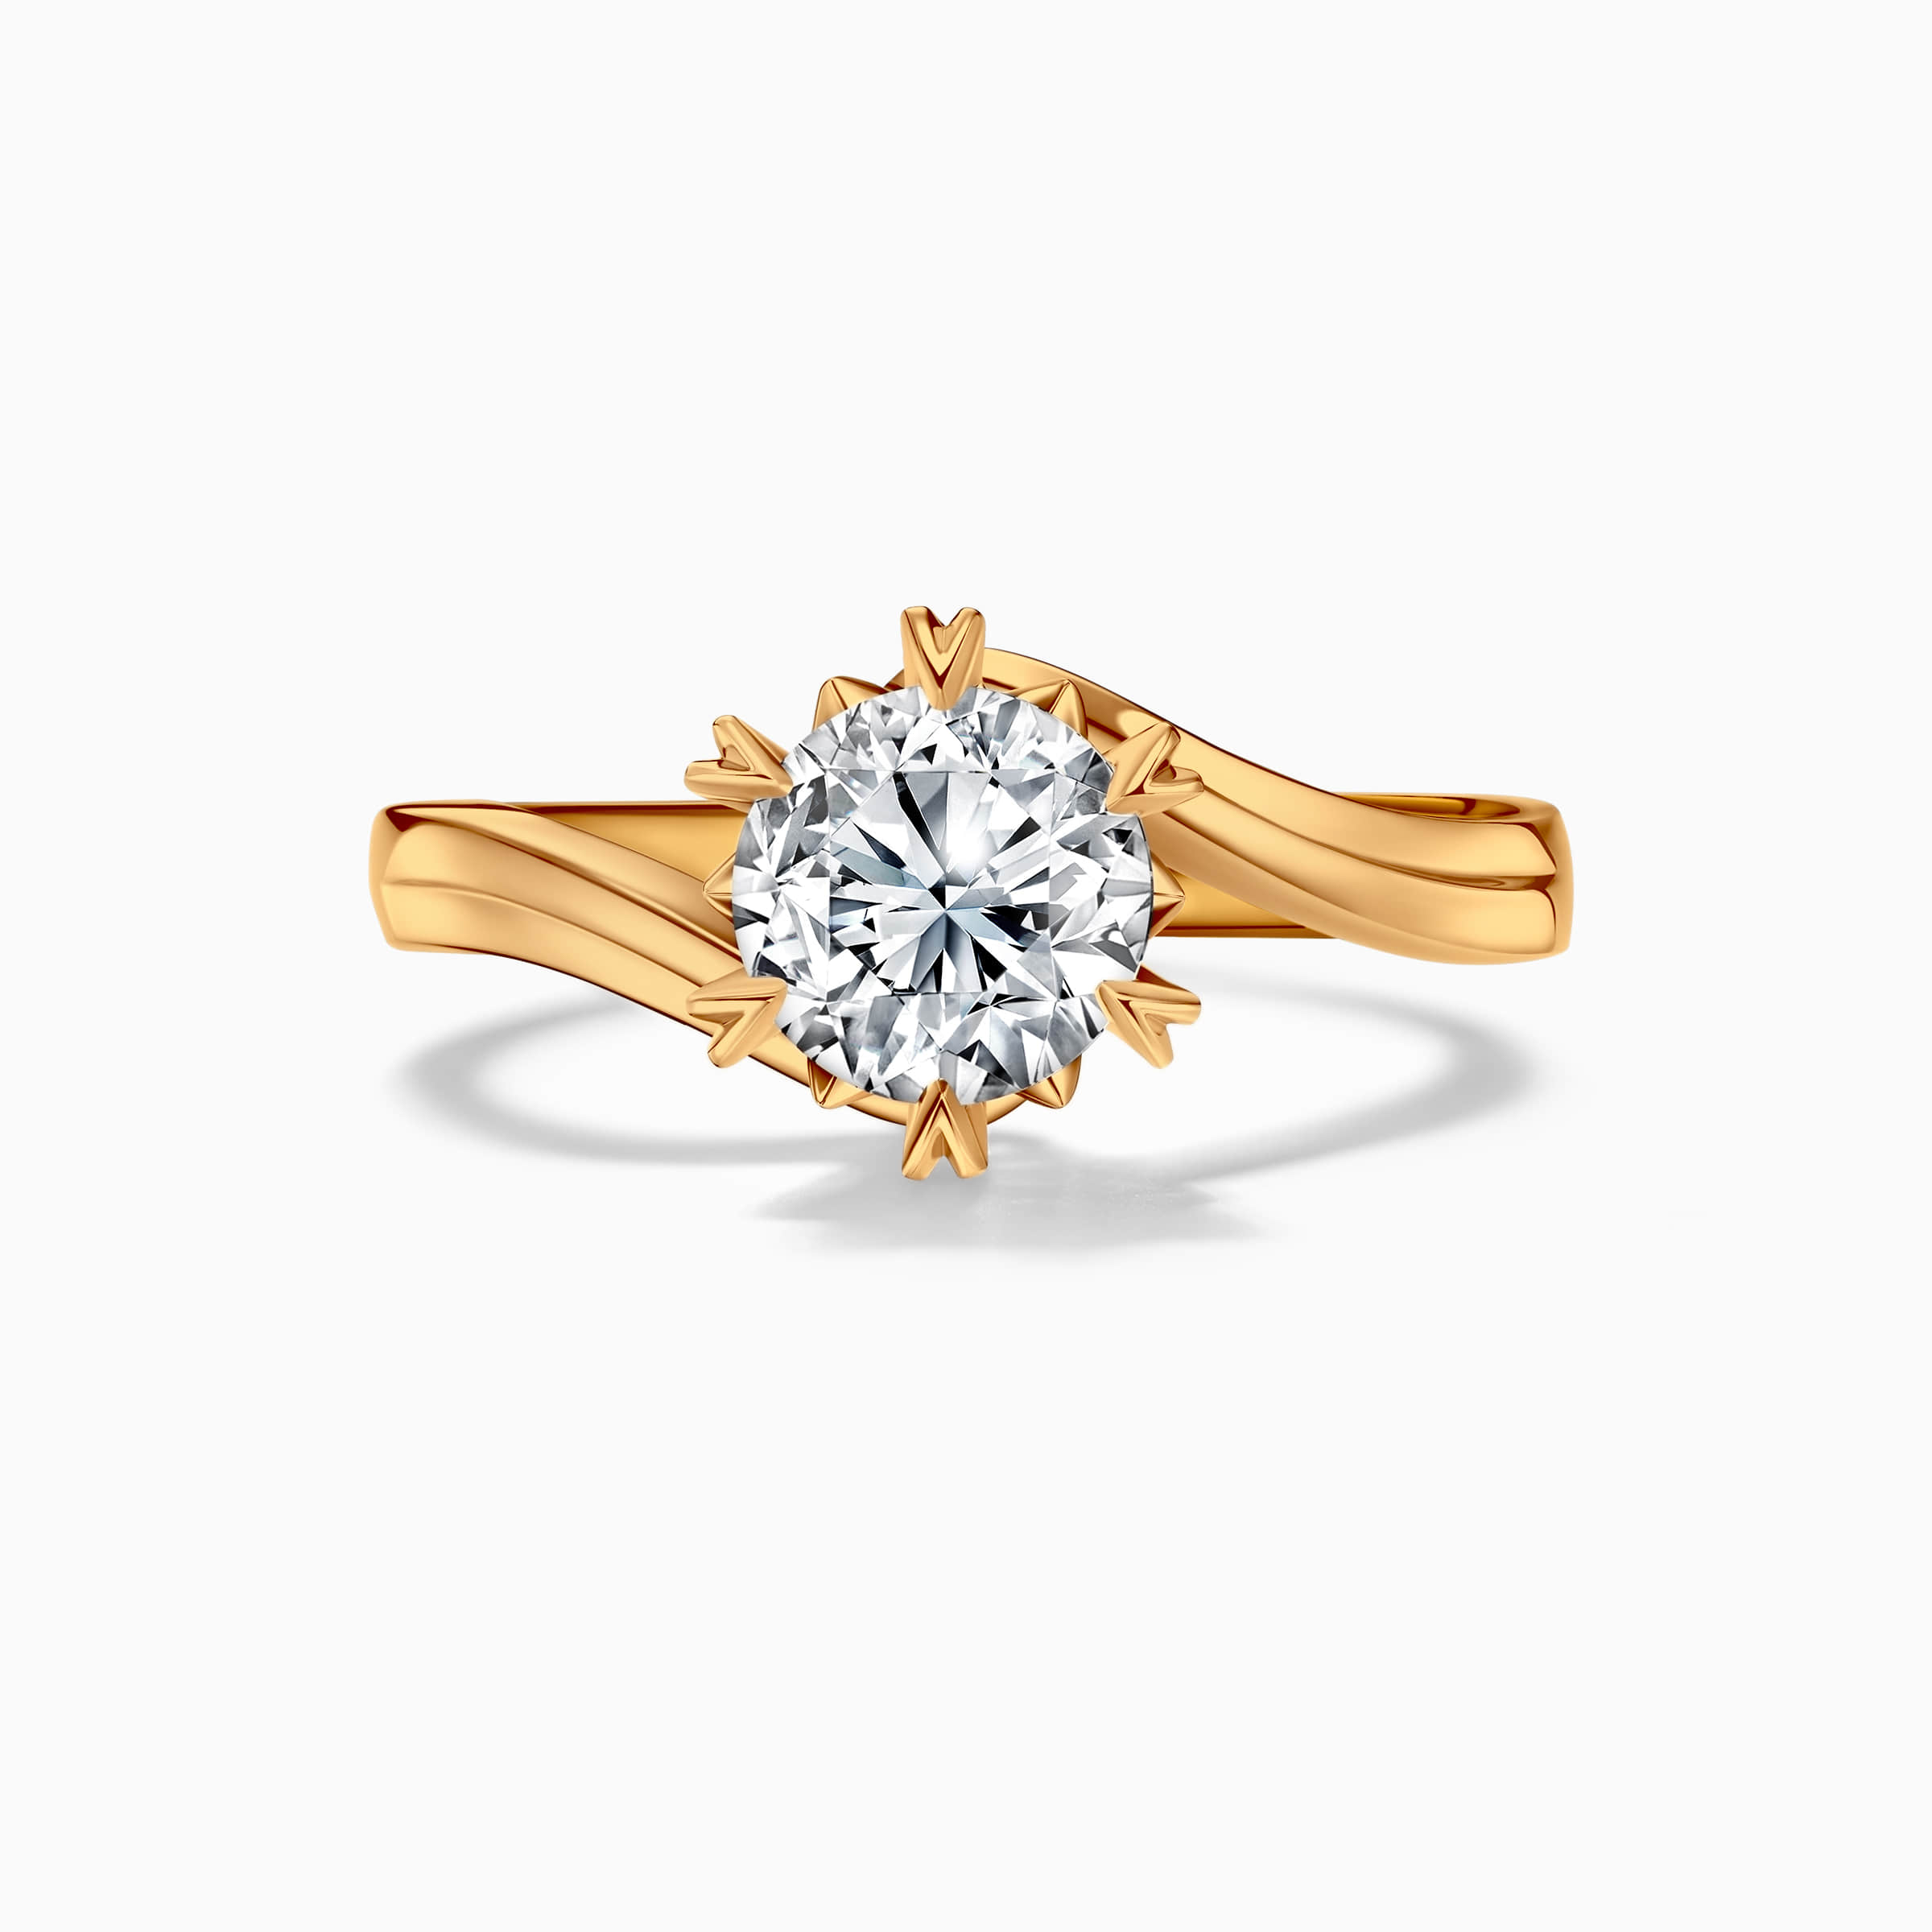 Darry Ring snowflake bypass engagement ring yellow gold